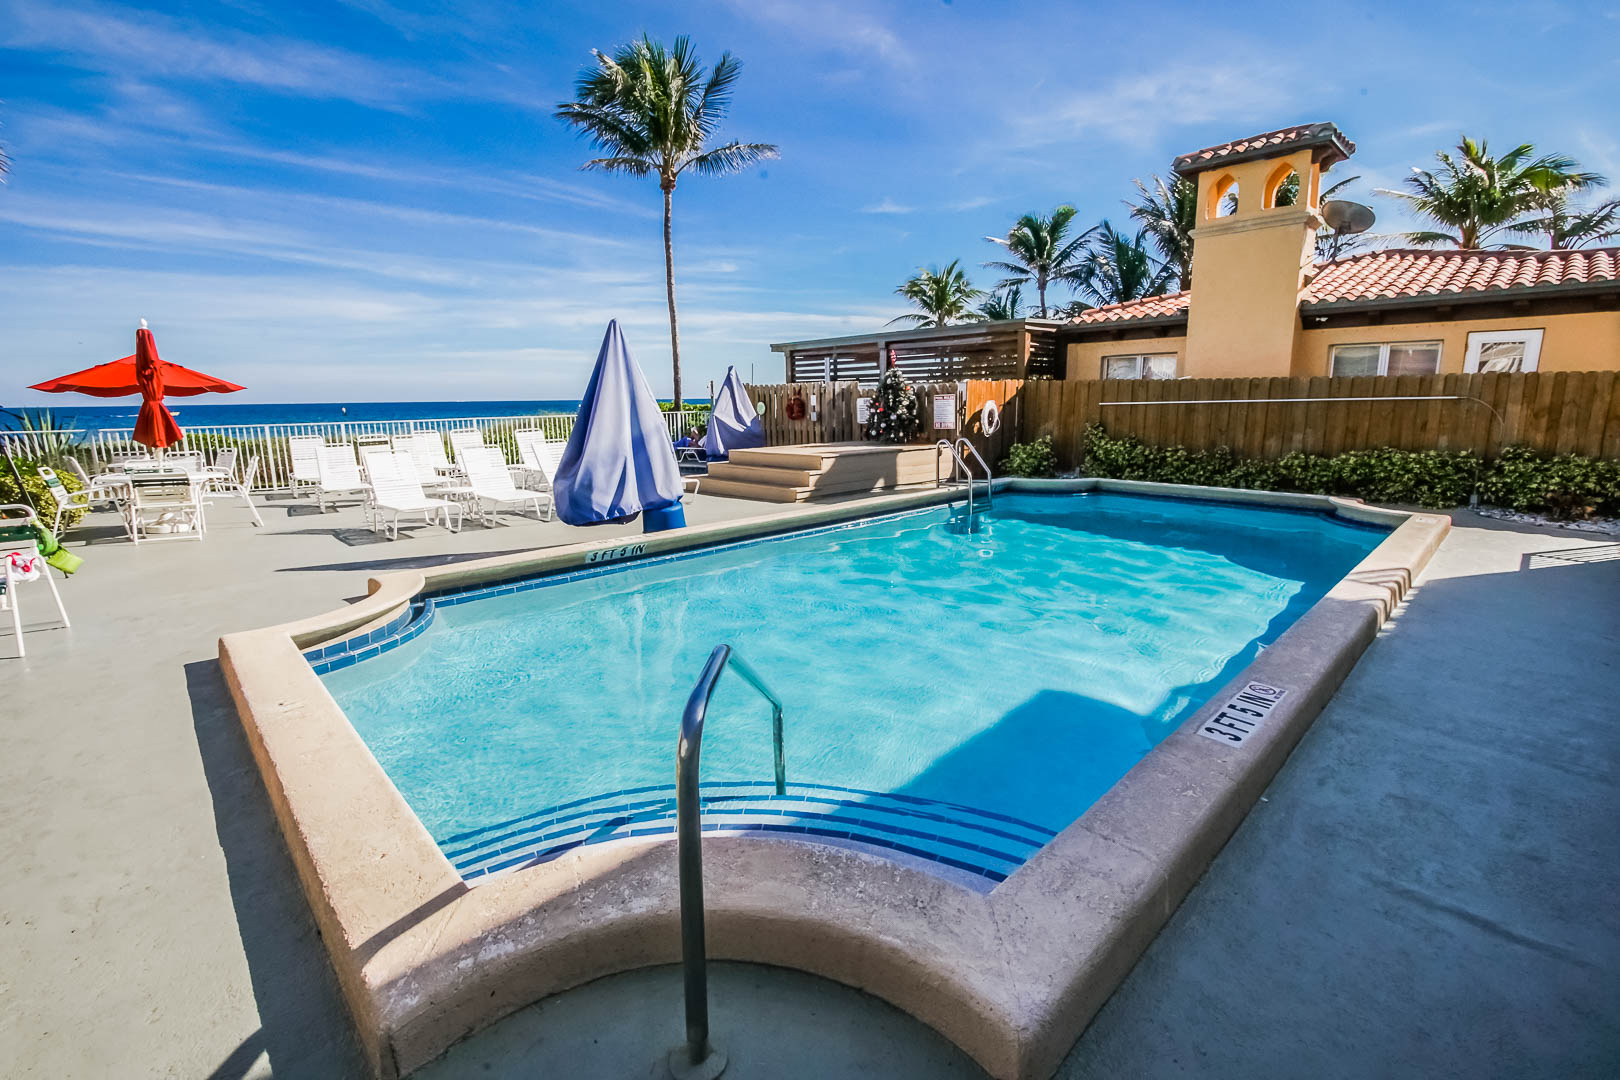 A refreshing pool with an ocean view at VRI's Berkshire Beach Club in Florida